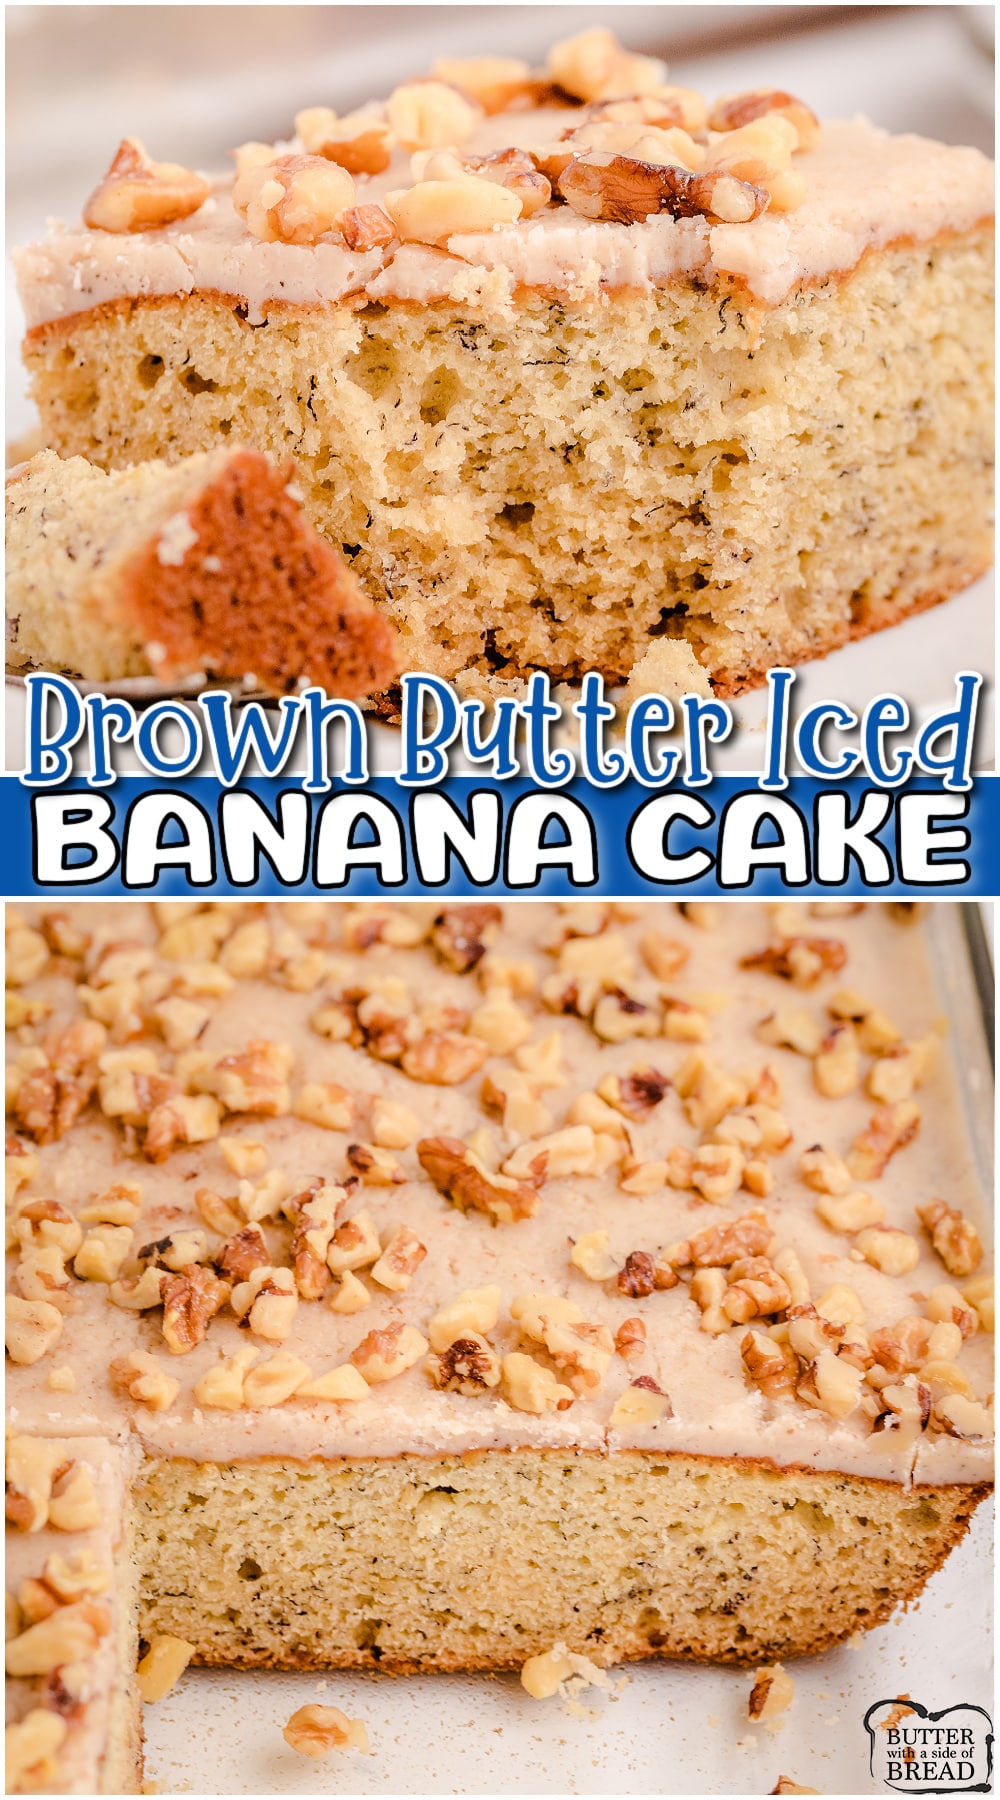 Frosted Banana Cake made from scratch with ripe bananas & topped with an incredible buttery icing! Deliciously moist banana cake recipe everyone loves!